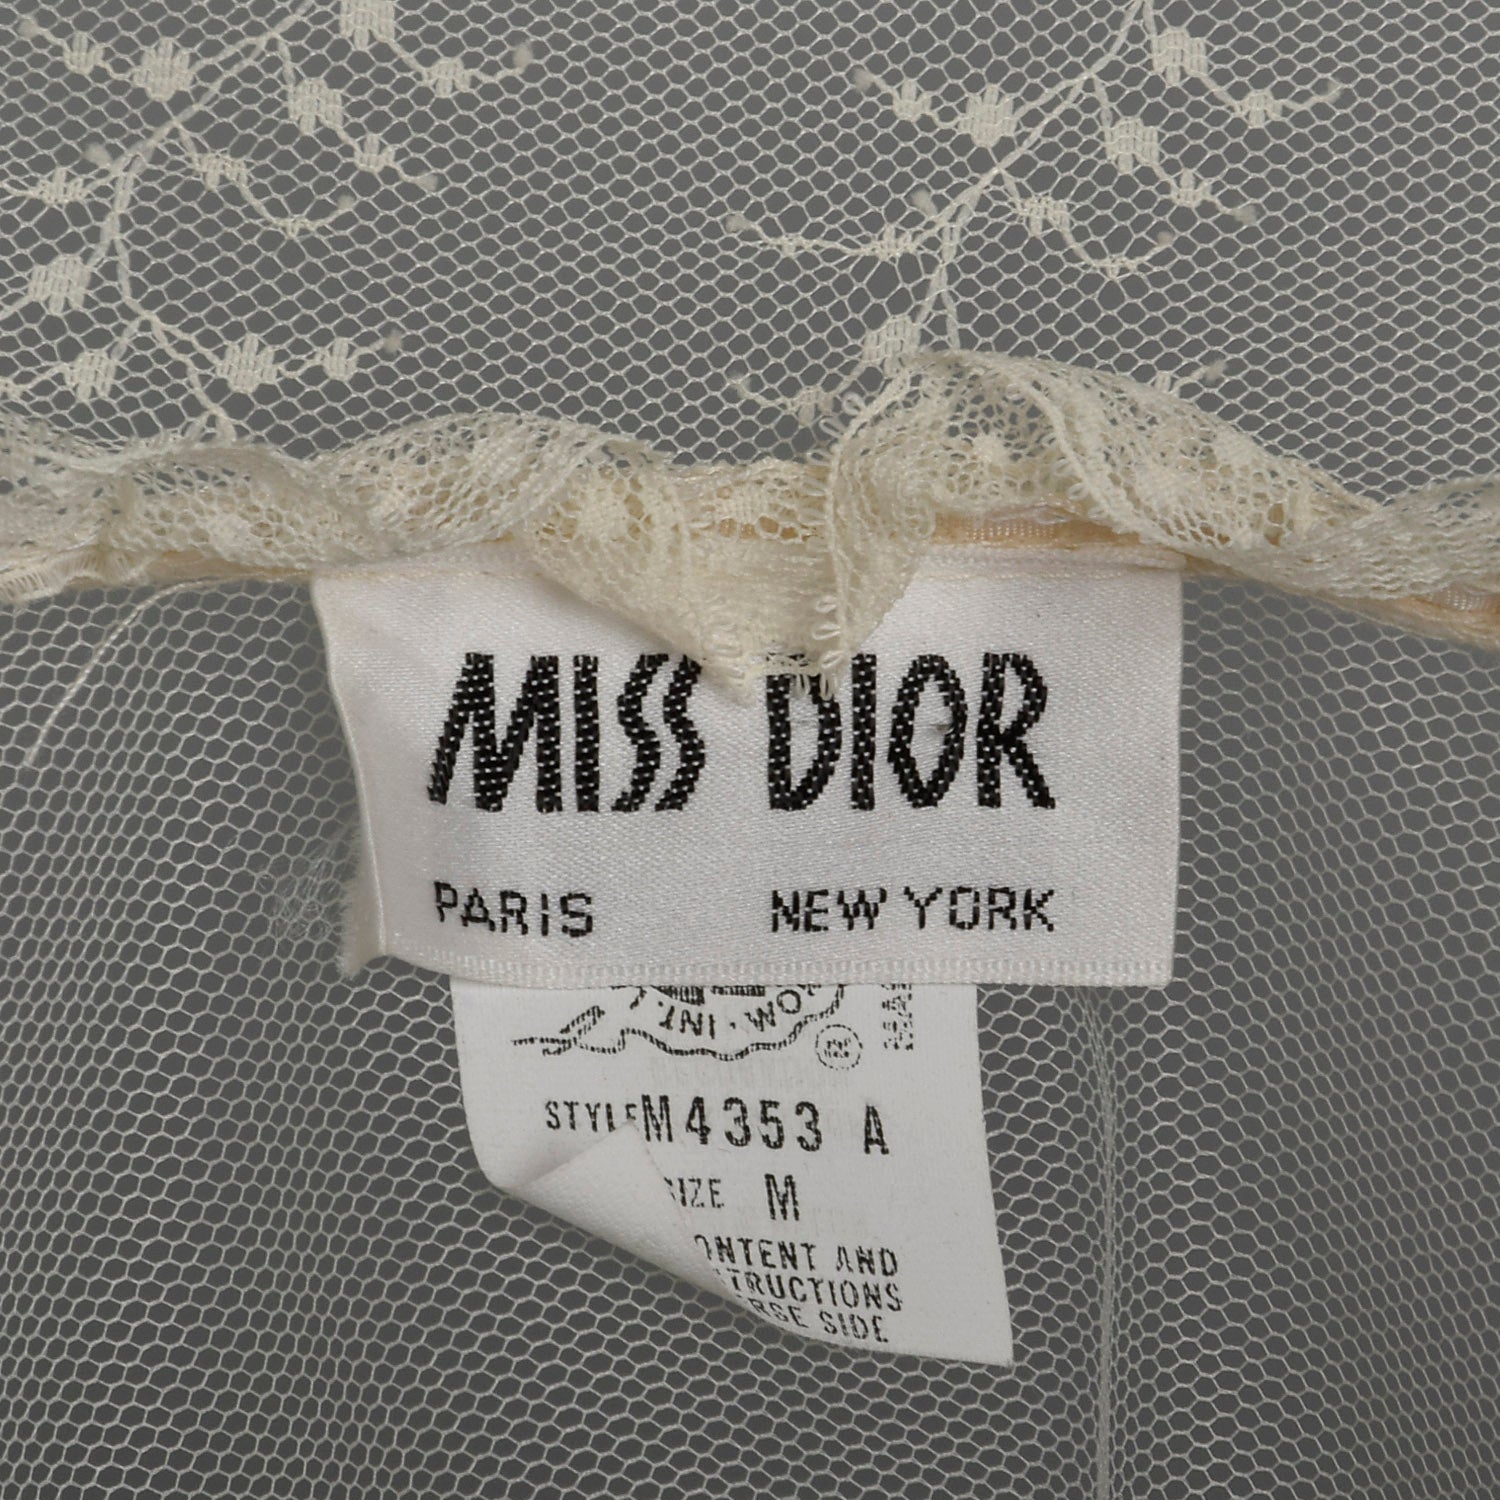 XS Miss Dior Christian Dior 1980s Lace Bed Jacket